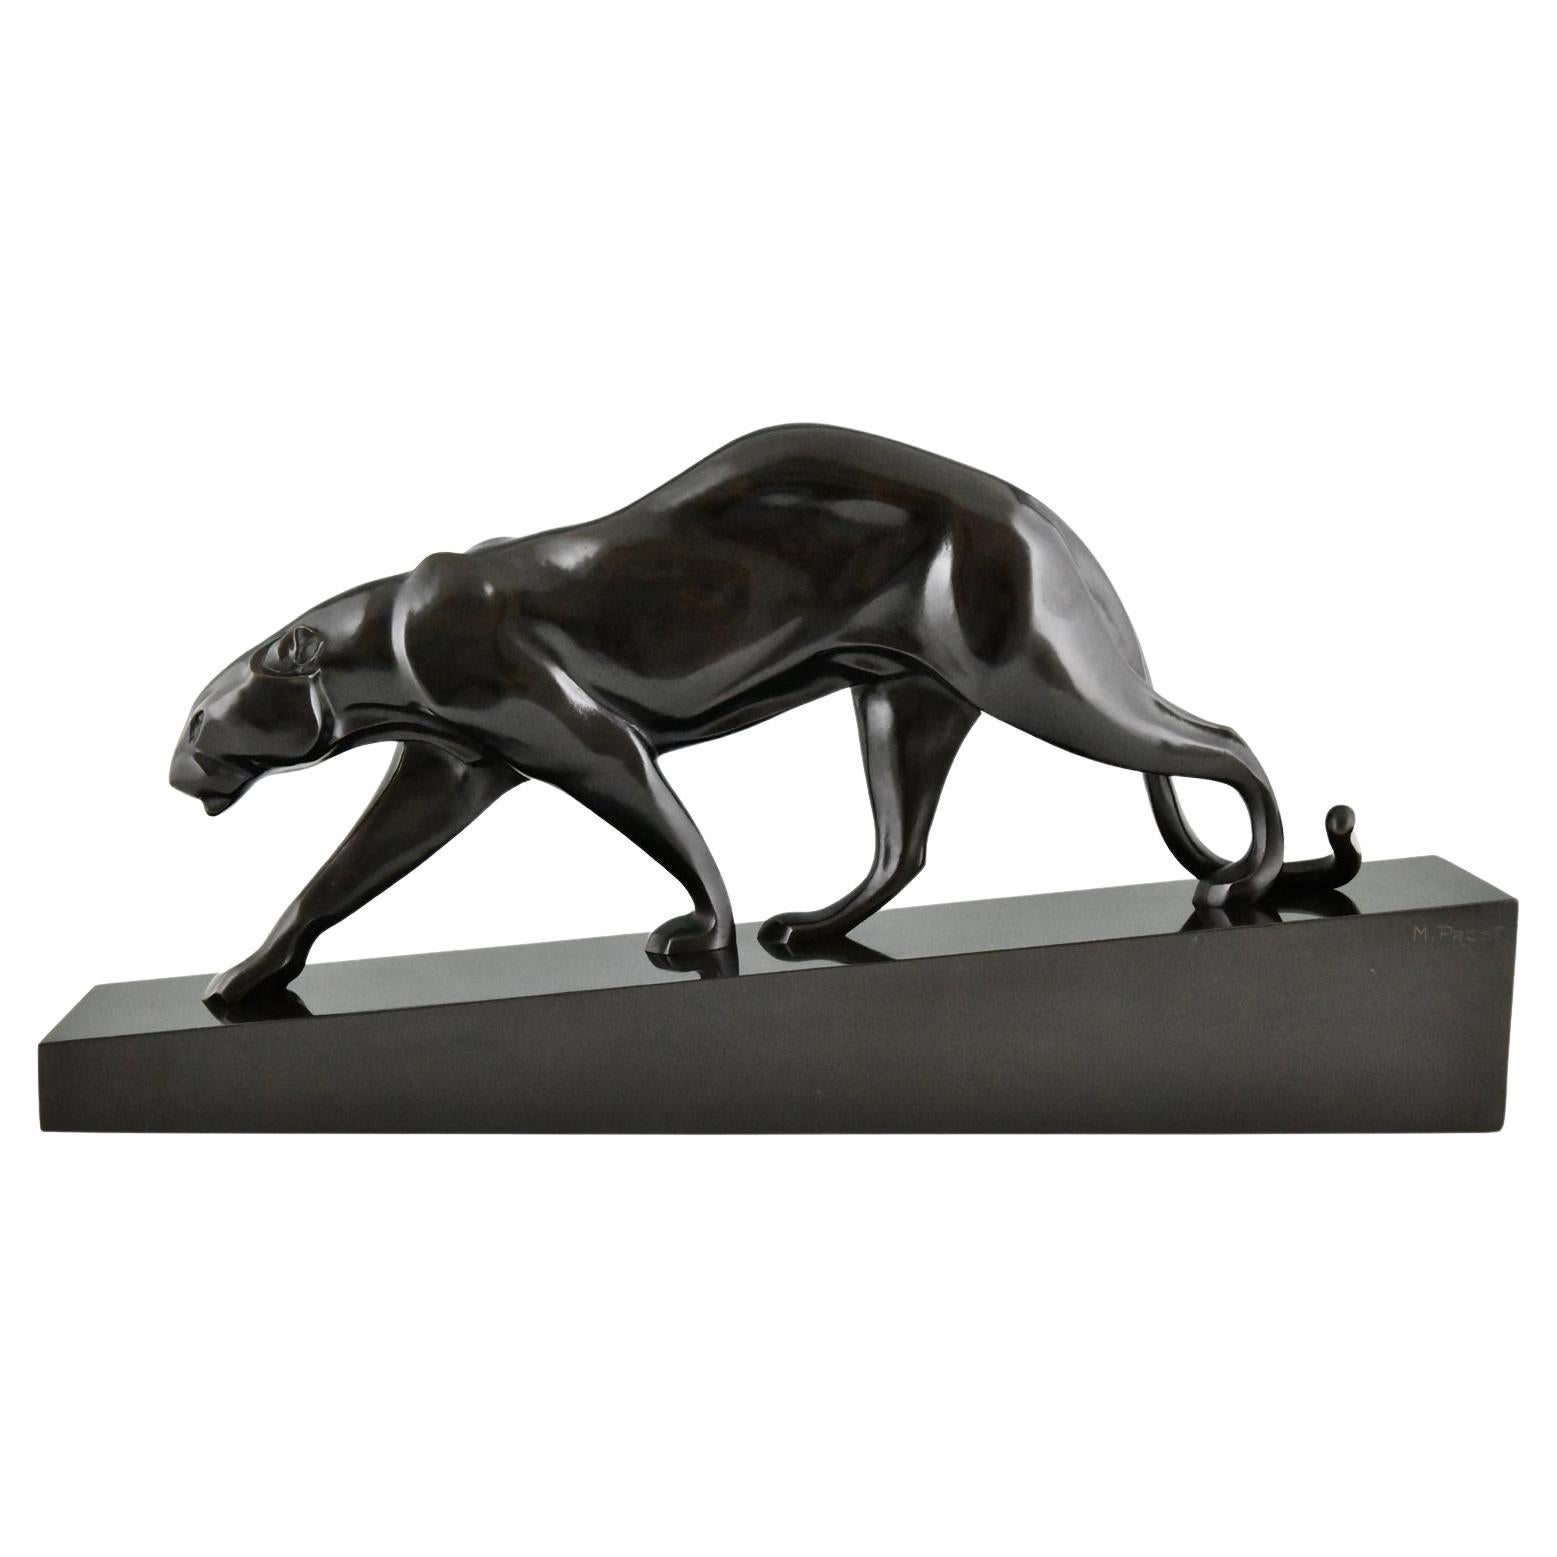 Art Deco Bronze Sculpture Panther by Maurice Prost, Susse Frères Foundry, 1930